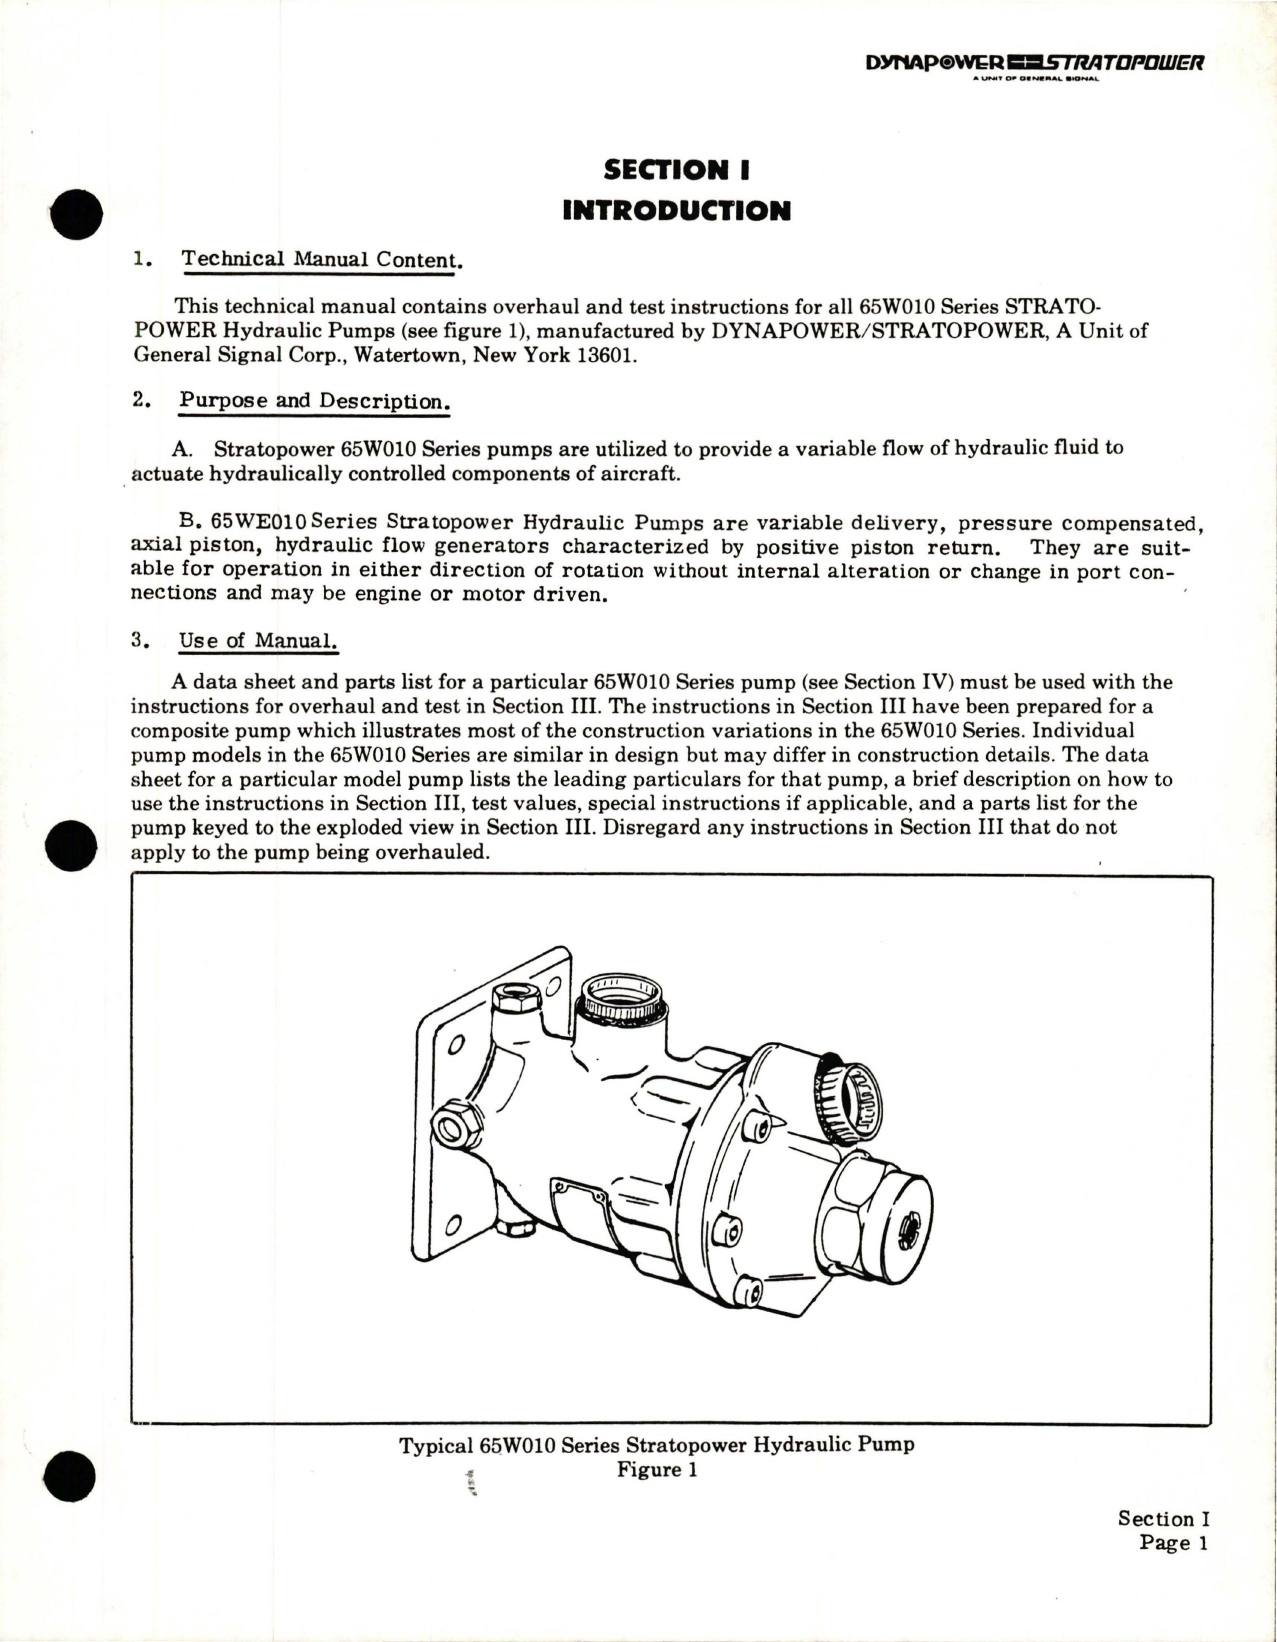 Sample page 5 from AirCorps Library document: Overhaul Instructions with Parts Breakdown for Stratopower Hydraulic Pump 65W Series